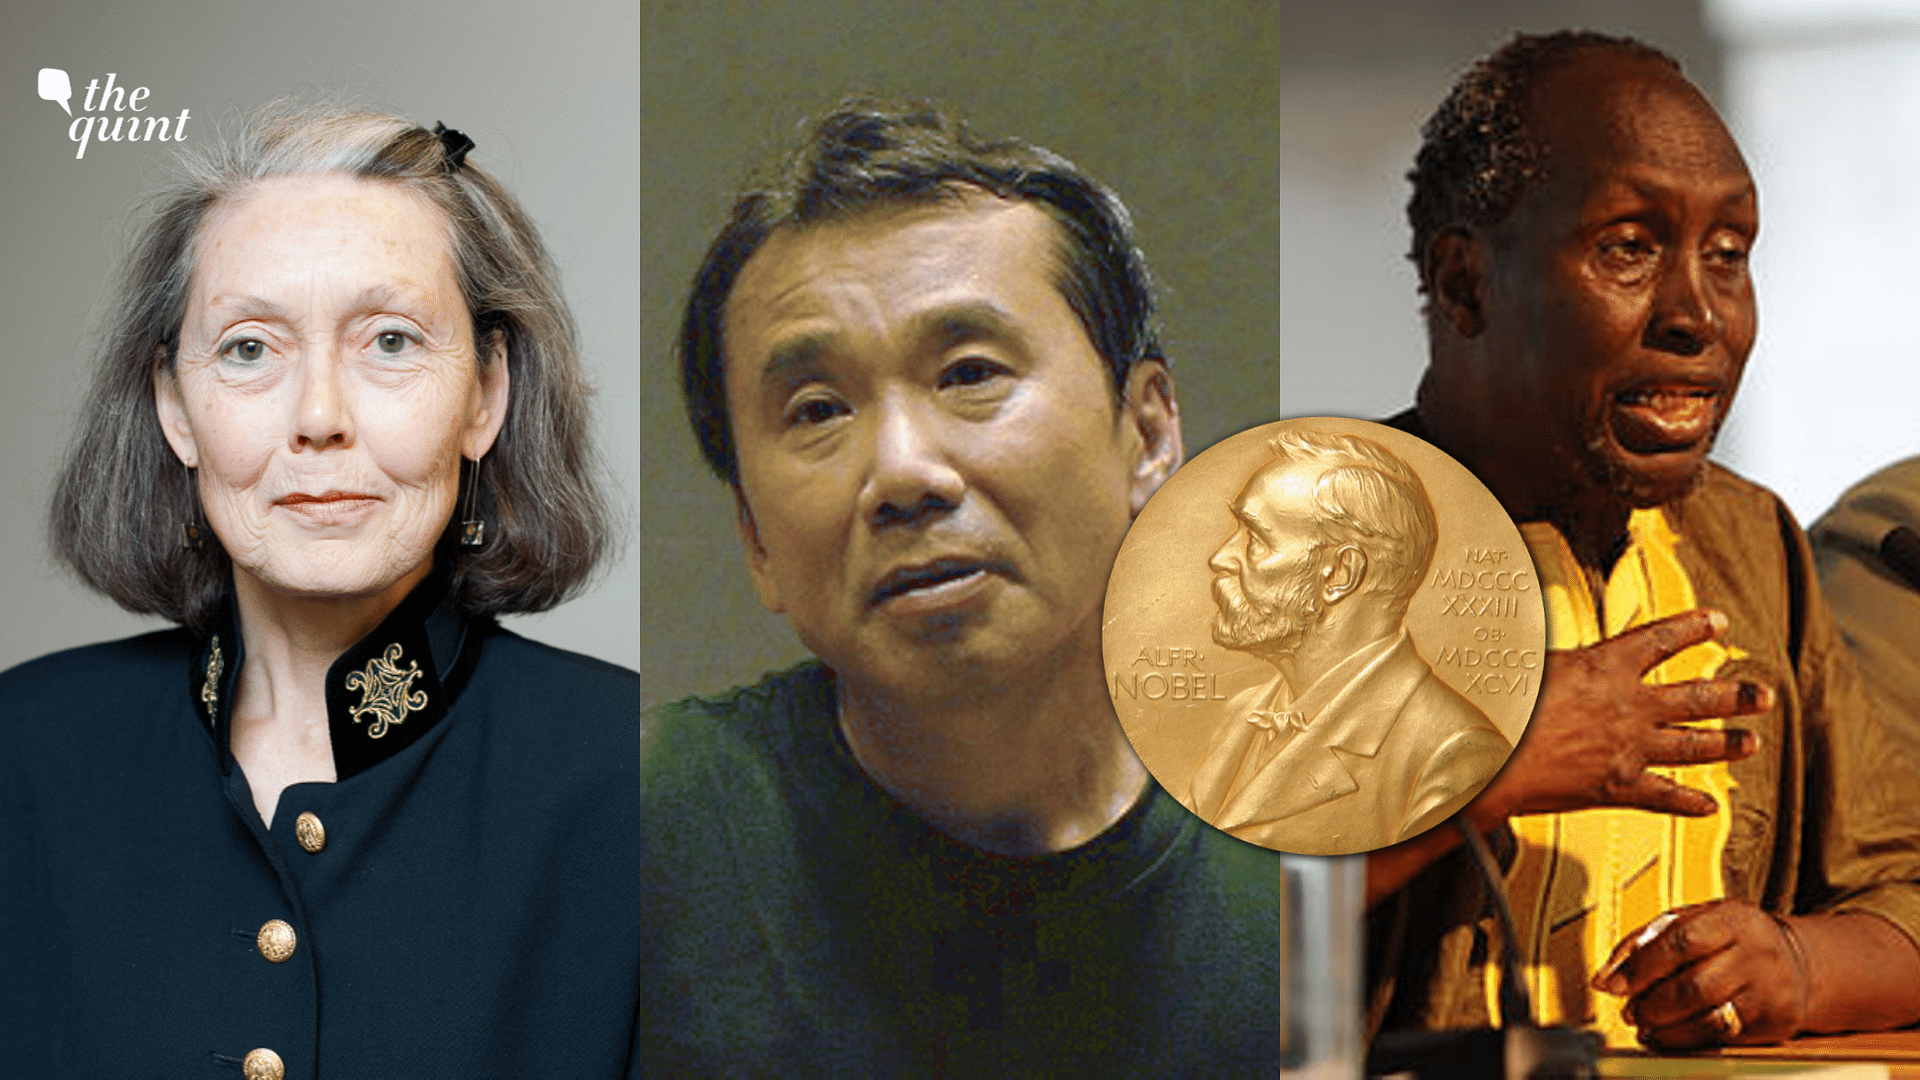 Anne Carson, Haruki Murakami, and Ngũgĩ wa Thiong’o are some of the top choices.